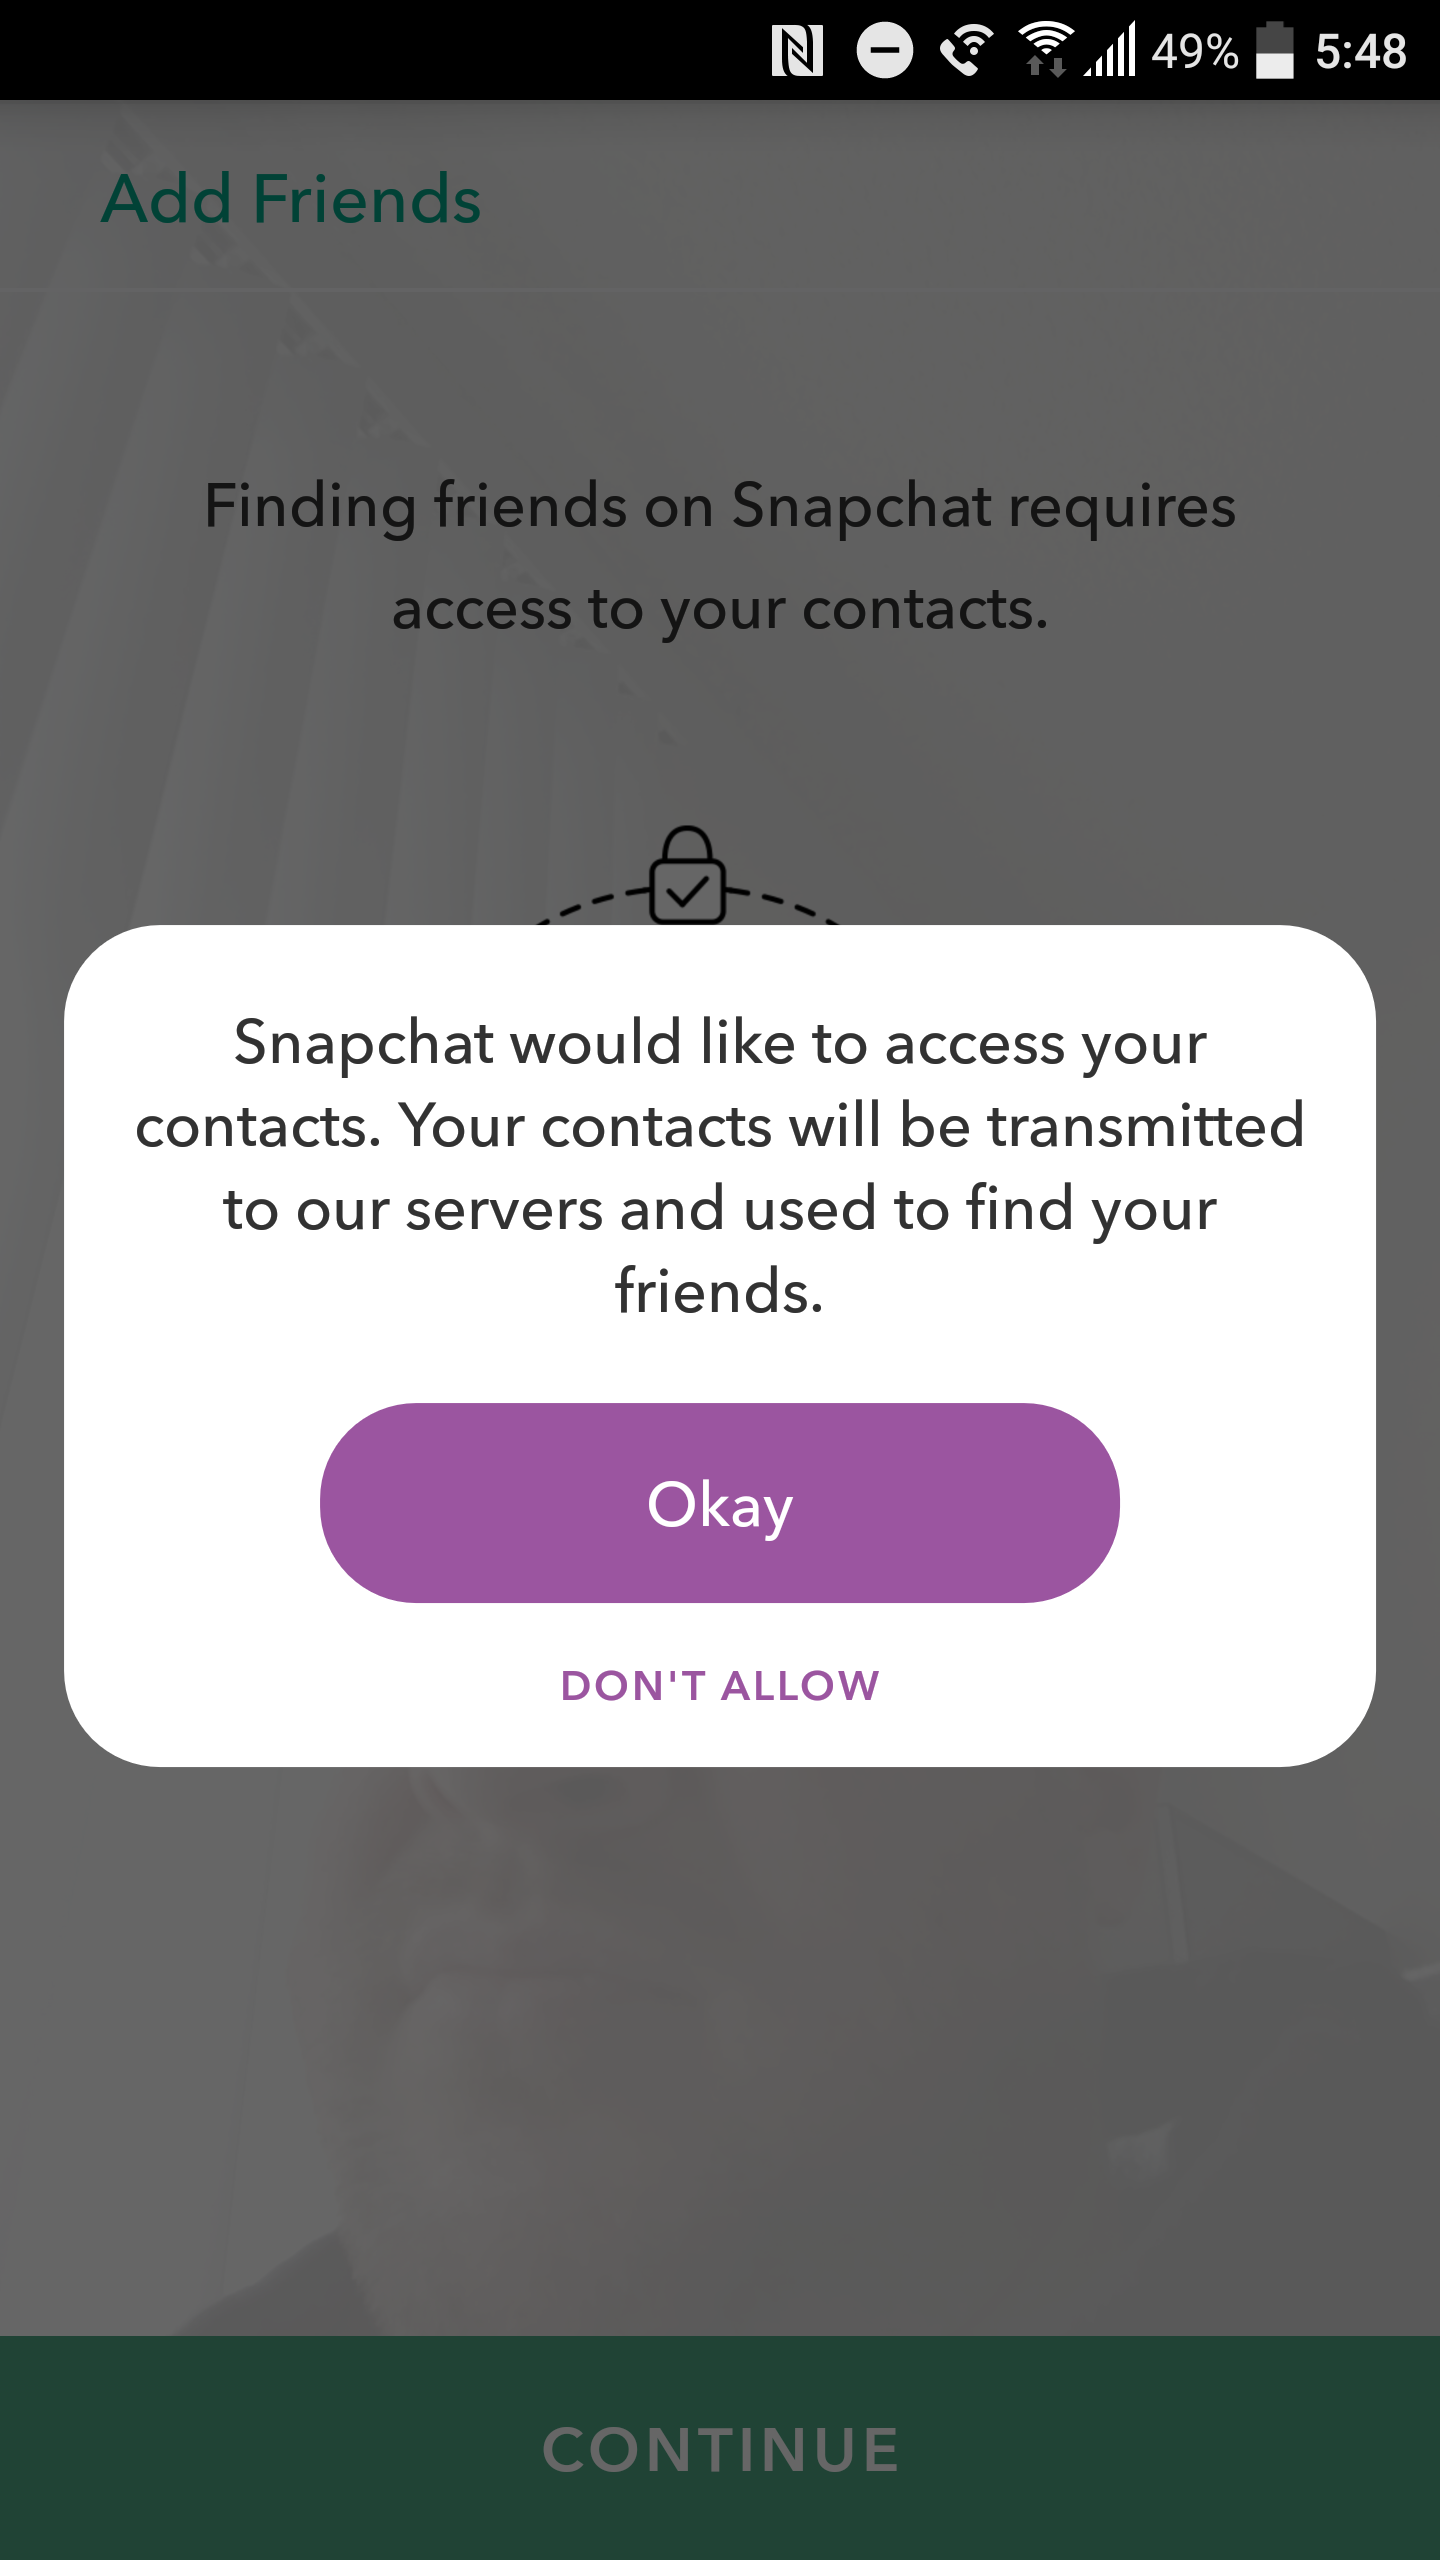 How To Add Friends On Snapchat By Phone Number